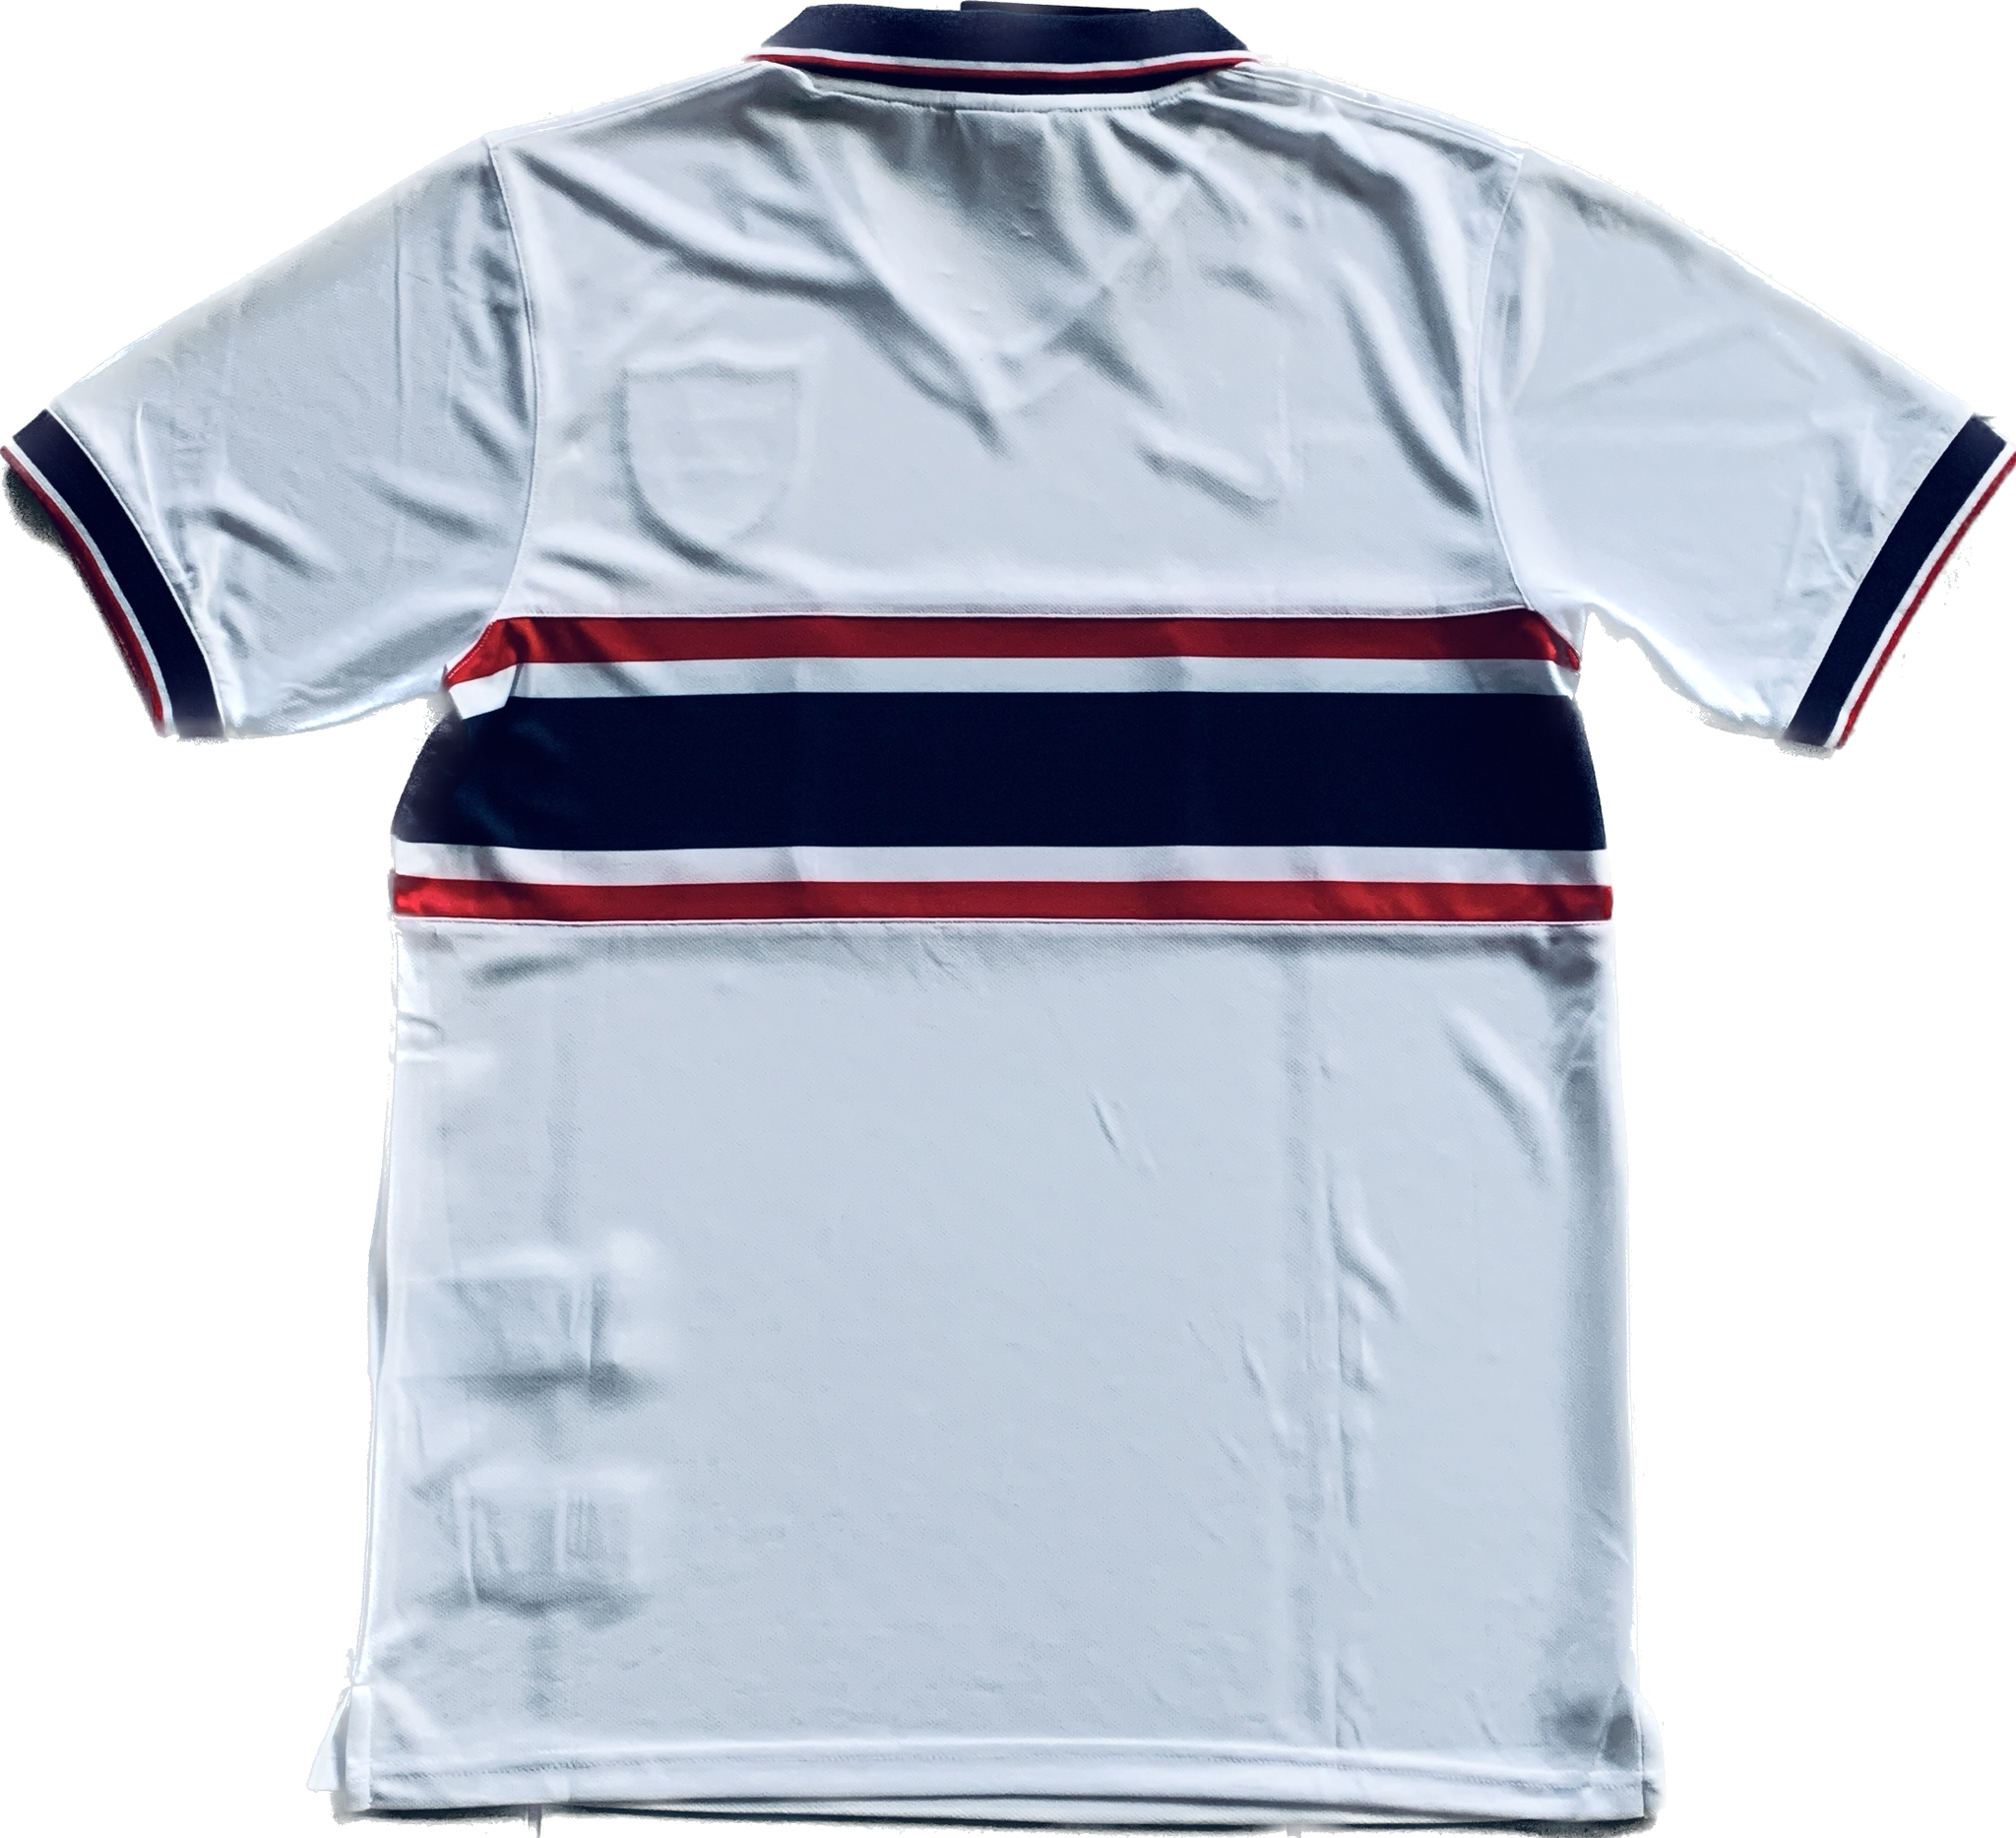 1994 Home  World cup jerseys, Usa world cup, World cup